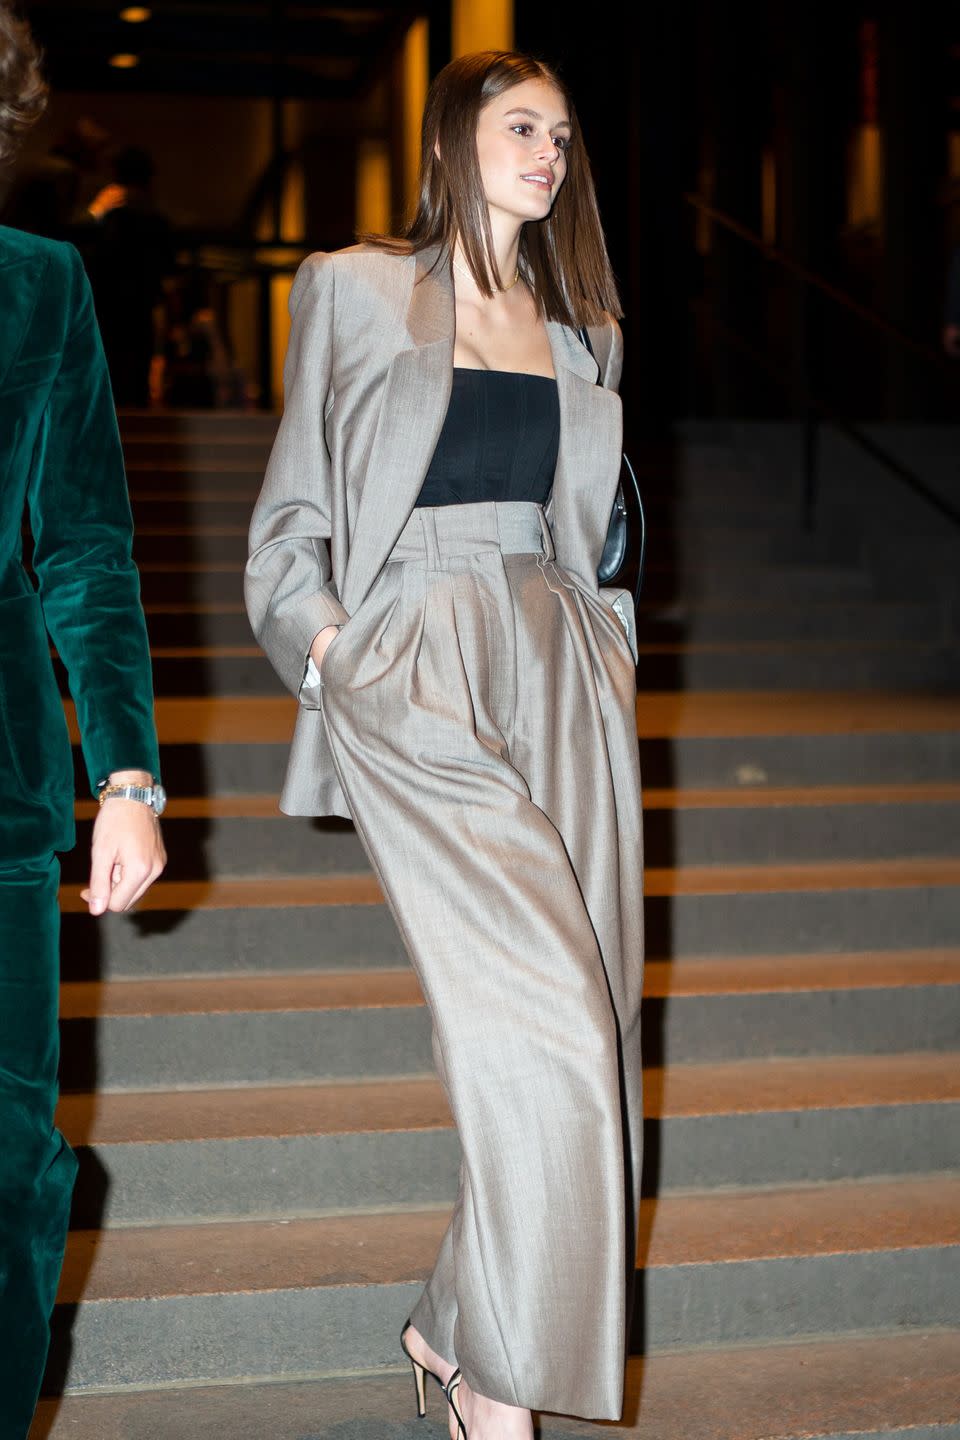 <p>Forget the floral maxi, an '80s power suit is a showstopping alternative wedding guest outfit, ideal for an evening reception in the city and worn masterfully by Kaia Gerber, of course, as she attended Marc Jacobs' big day.</p>